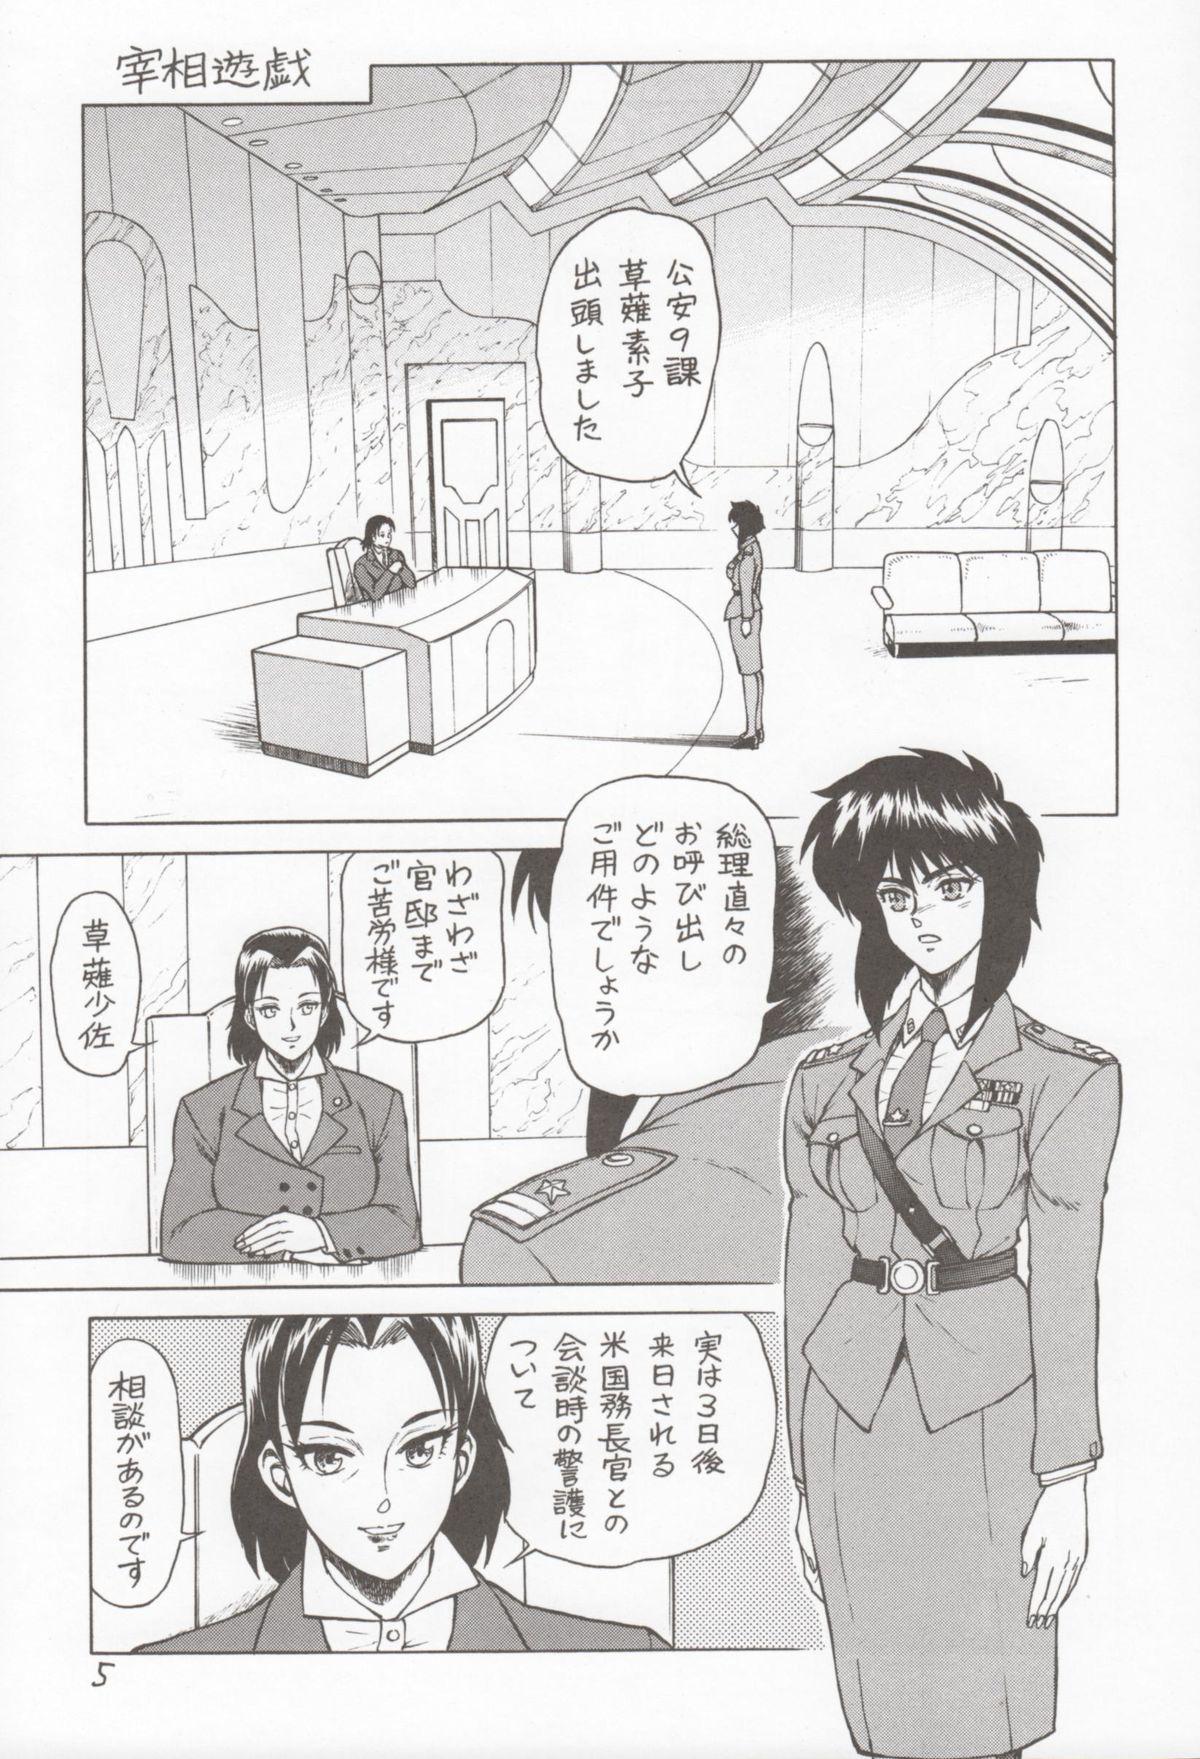 Classy Koukaku G.I.S & S.A.C Hon 4 - Ghost in the shell Beauty - Page 4